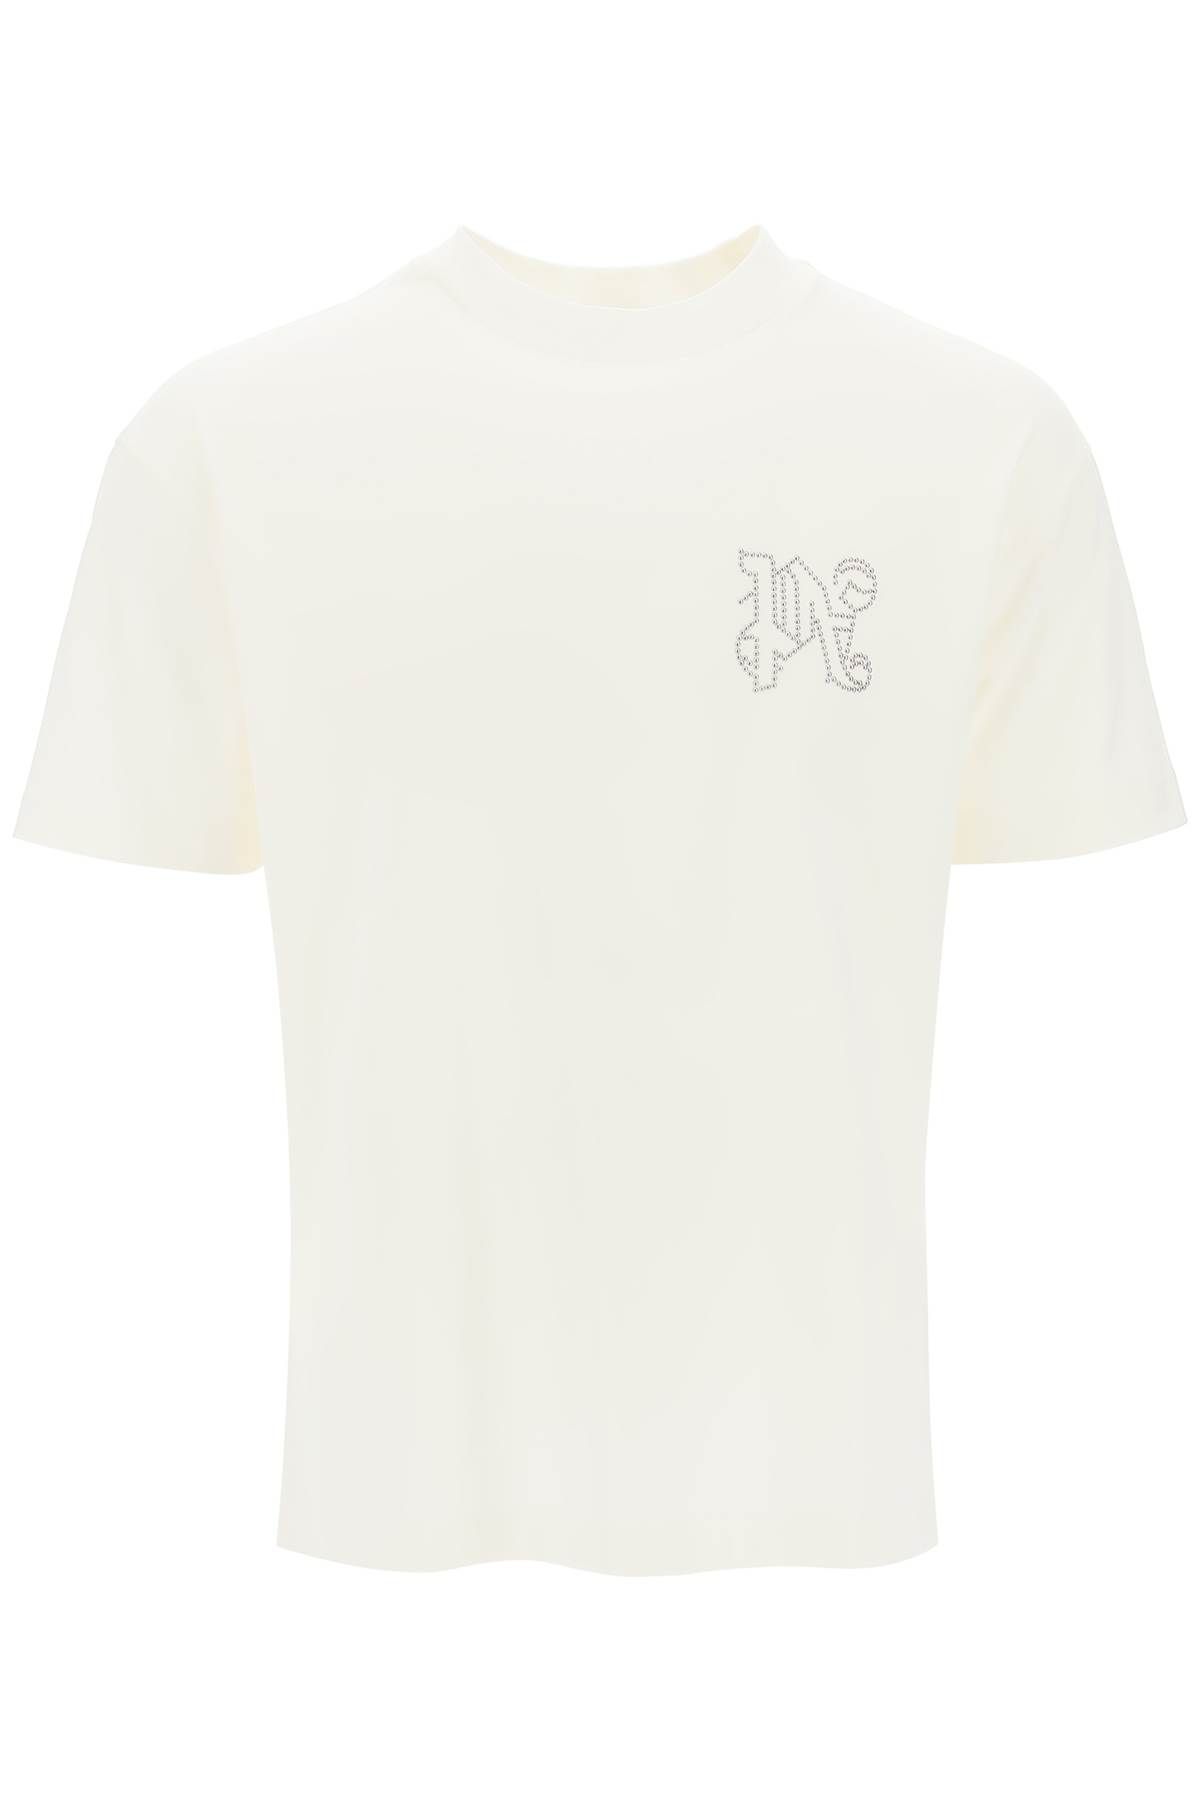 PALM ANGELS PALM ANGELS t-shirt with studded monogram